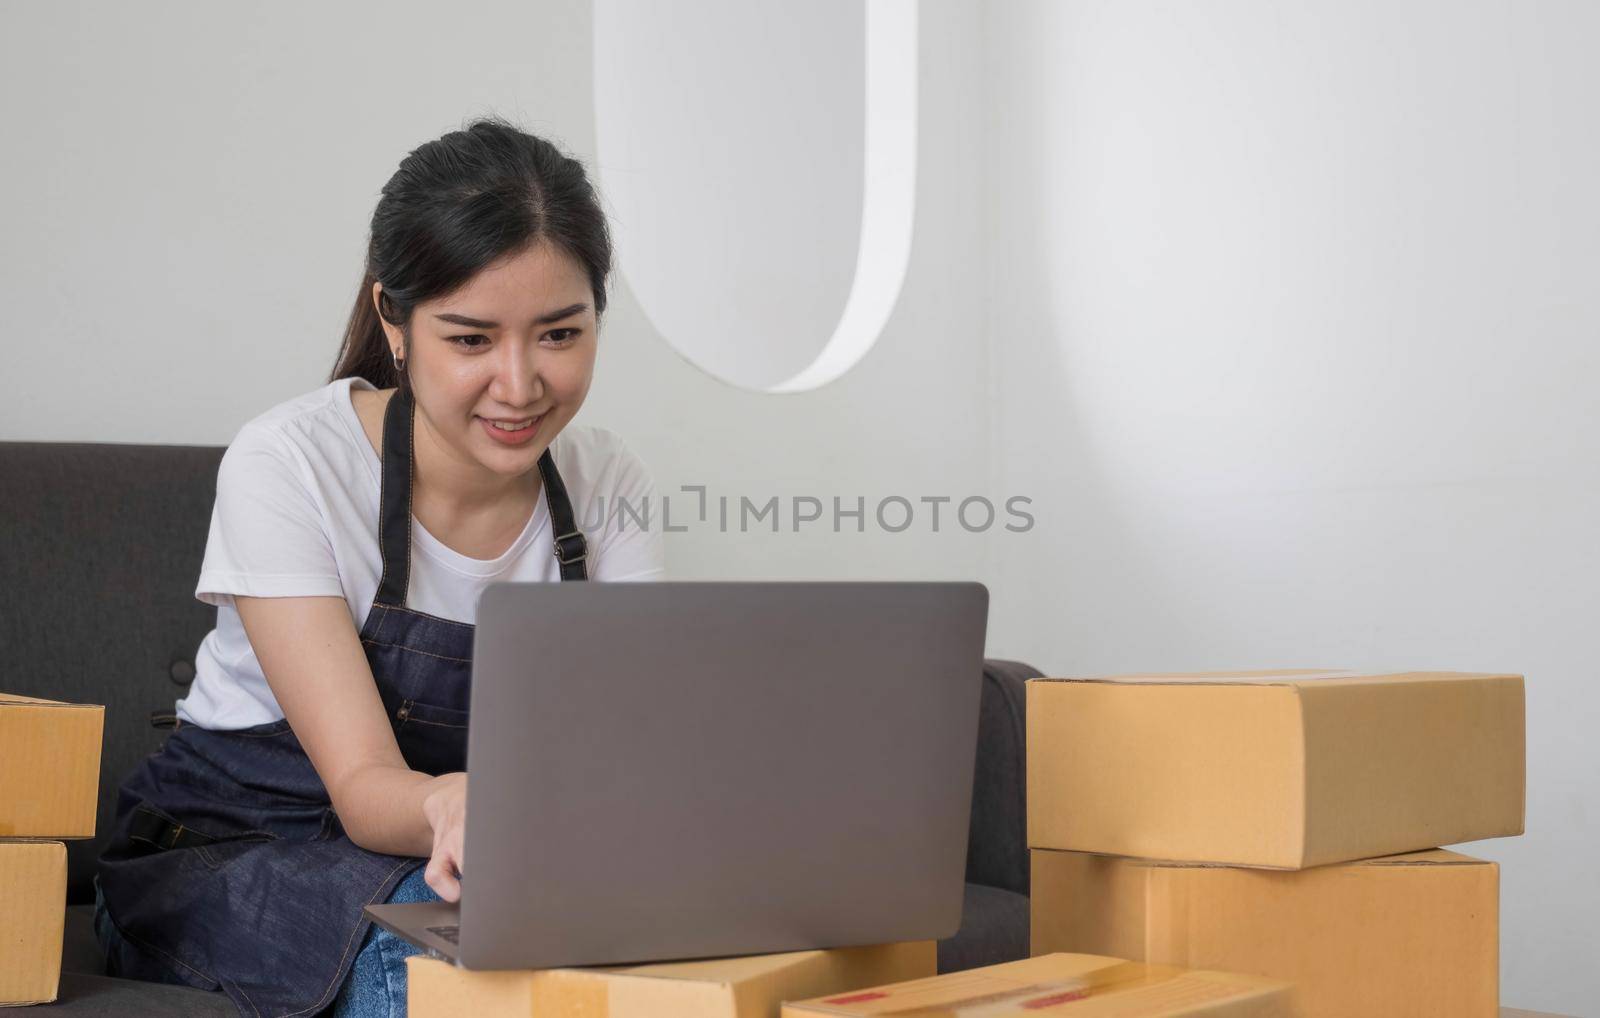 Starting Small business entrepreneur freelance,Portrait young woman working at home office, BOX,smartphone,laptop, online, marketing, packaging, delivery, SME, e-commerce concept.